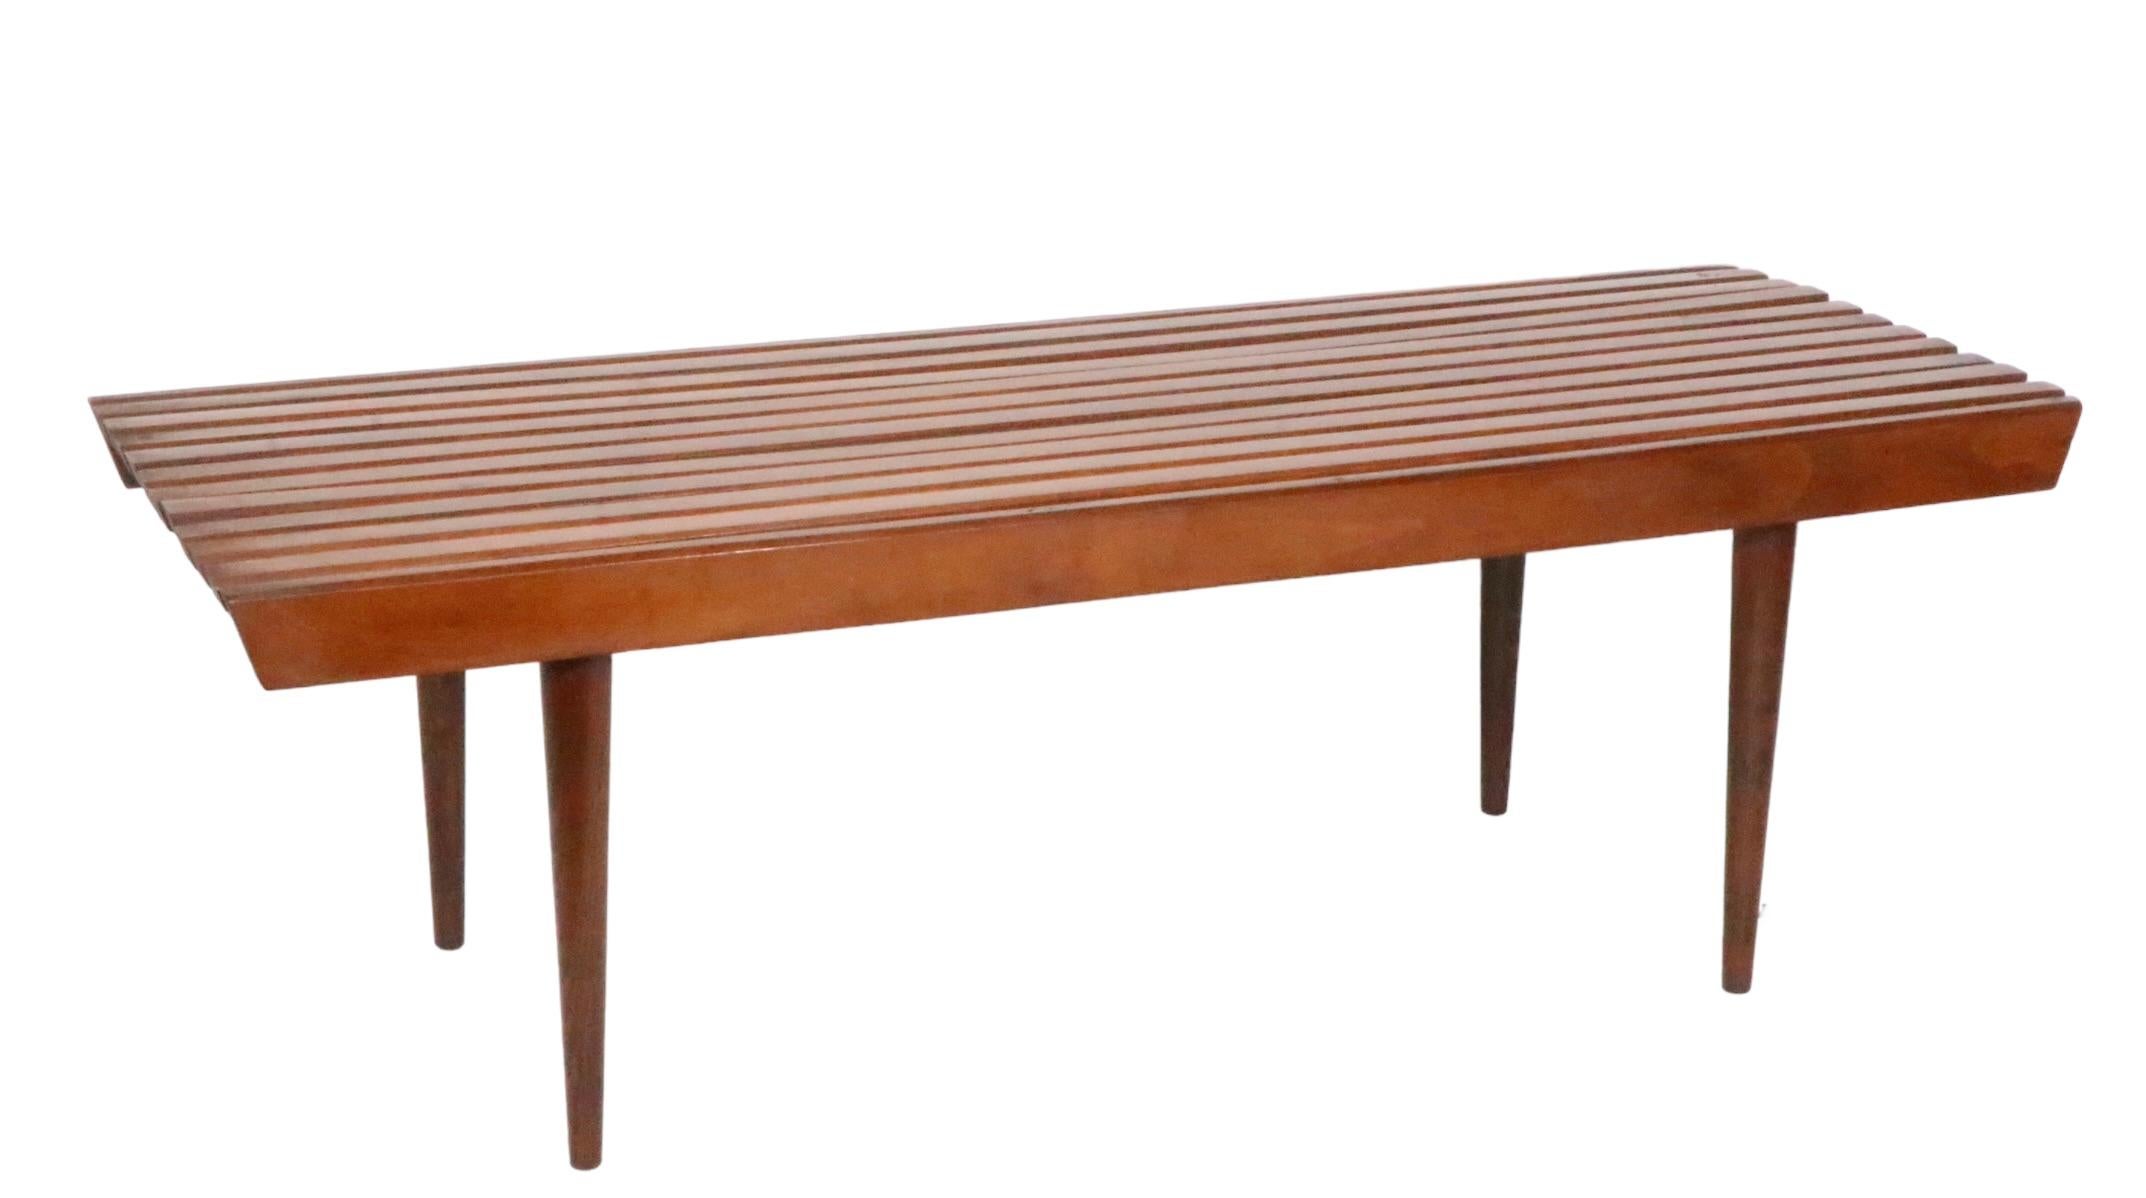 Macedonian Mid Century Slat Bench Coffee Table Made in Yugoslavia C 1950s For Sale